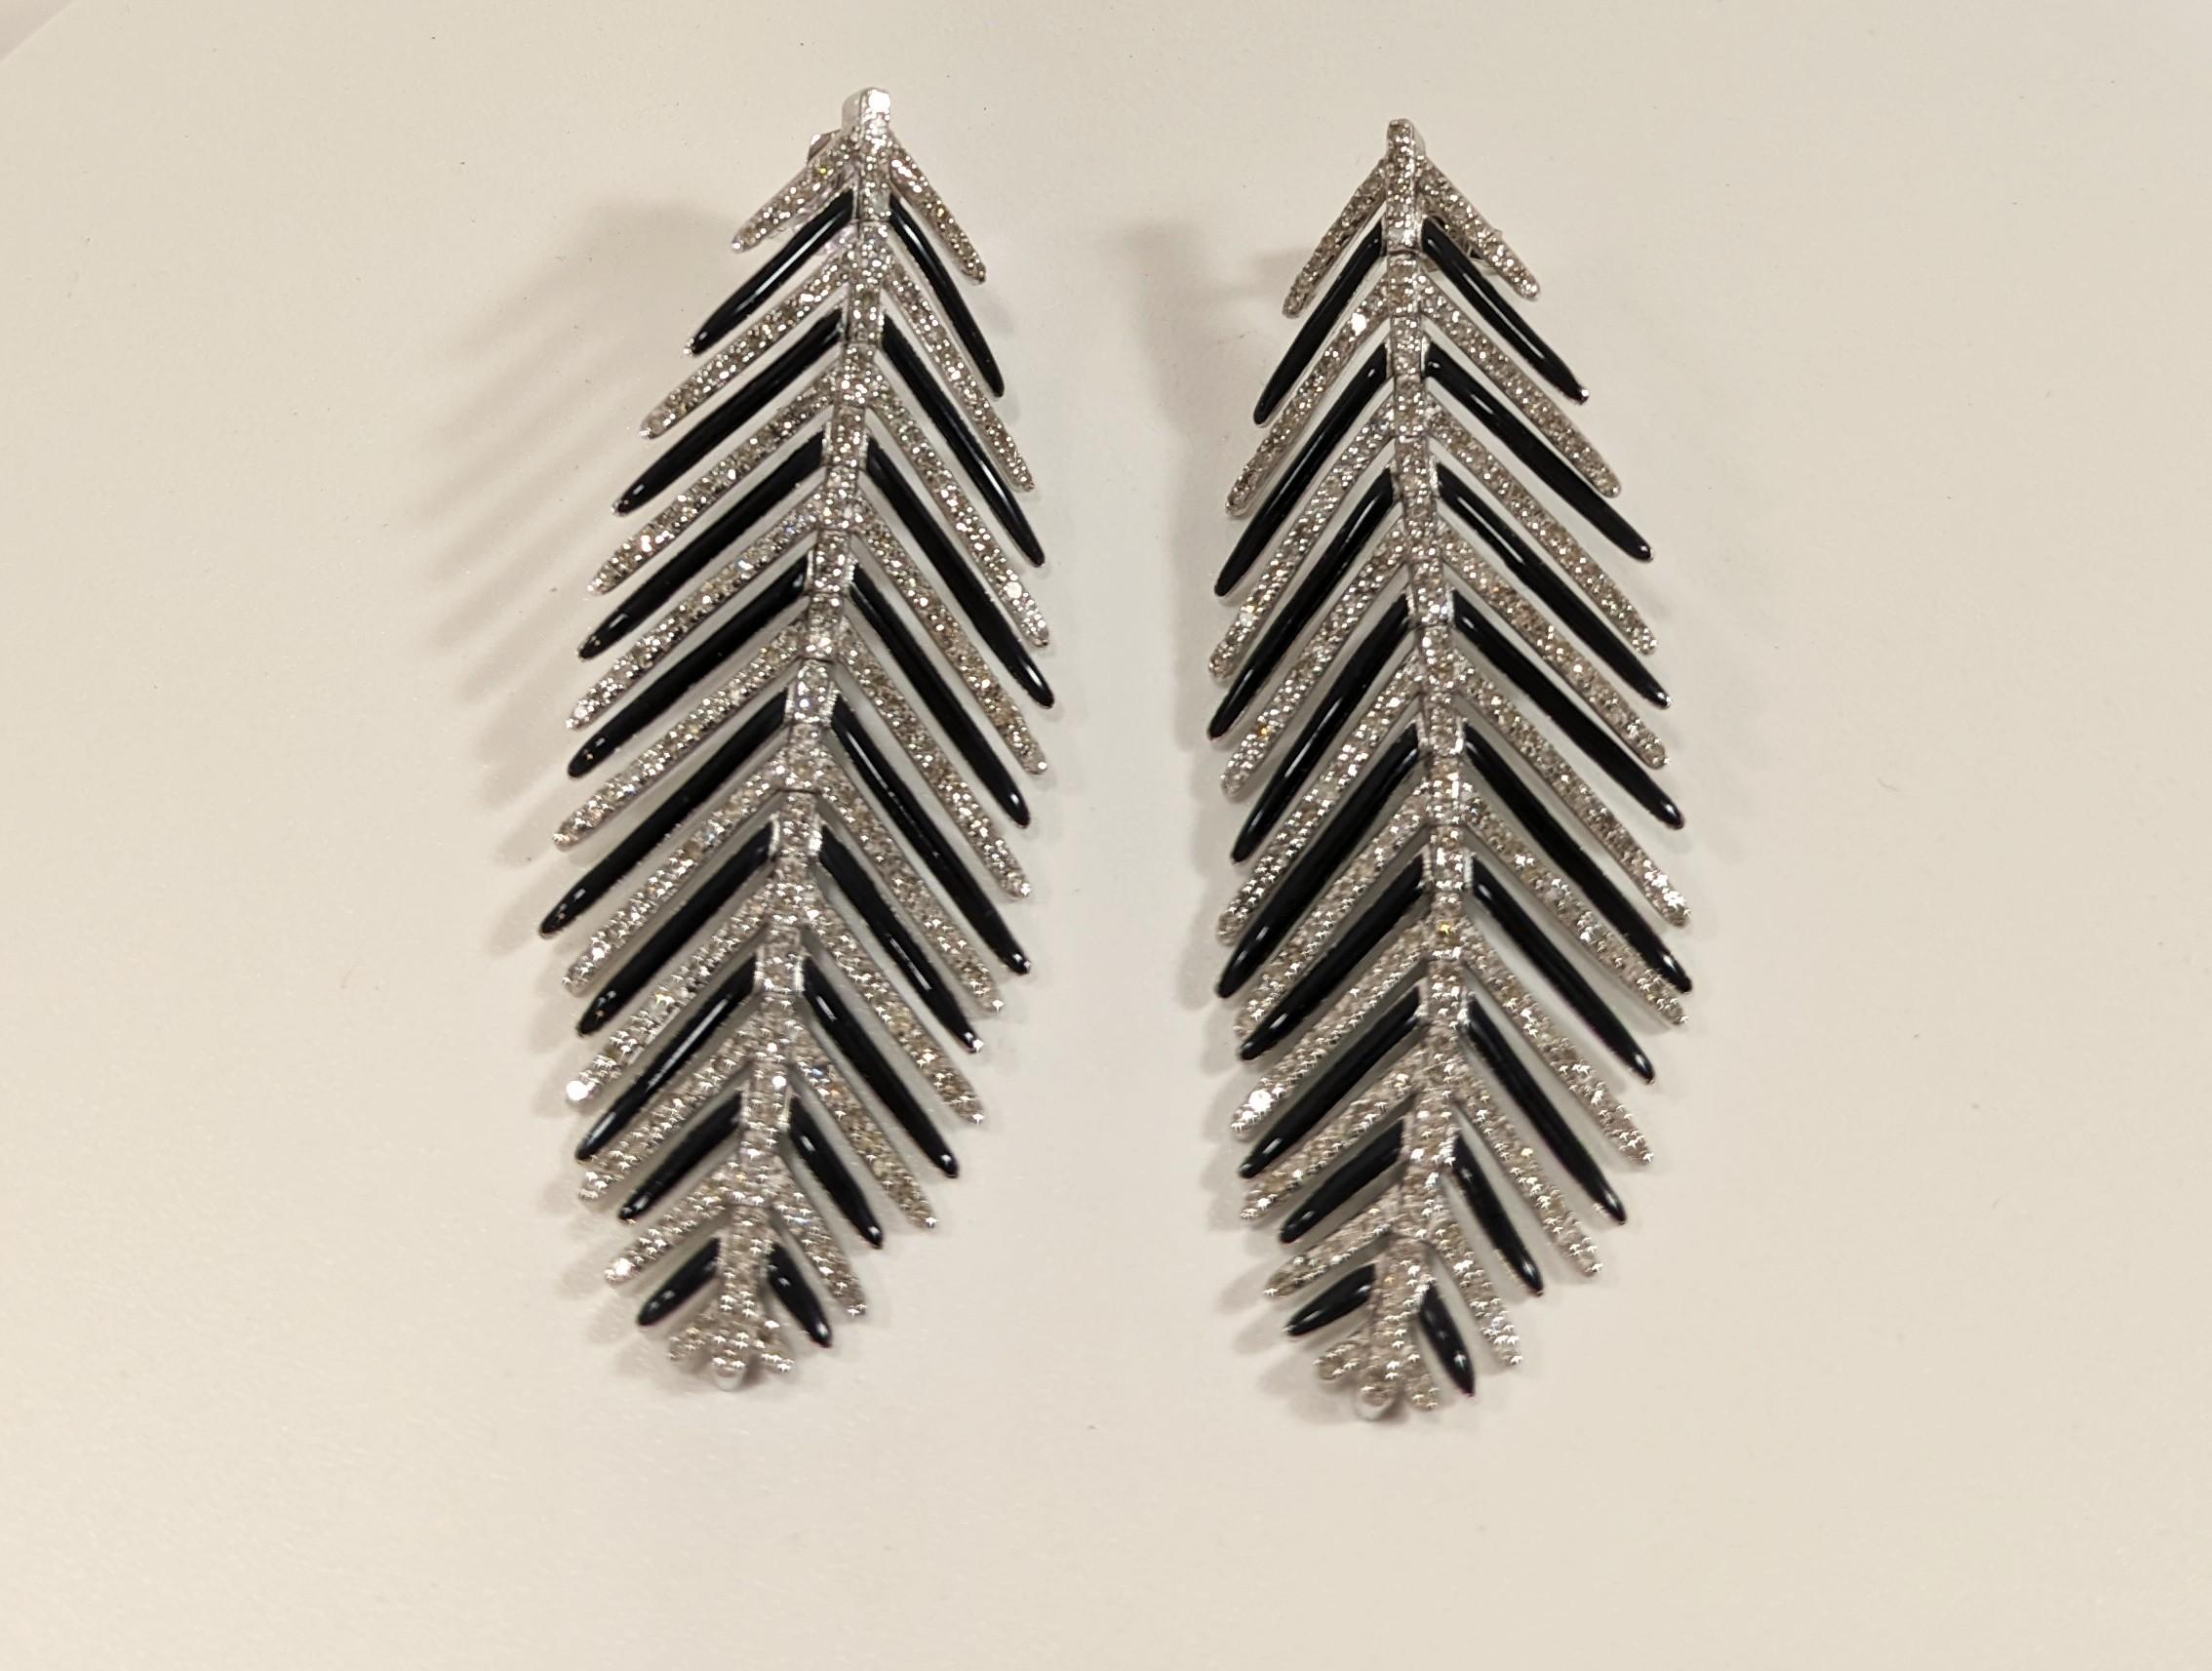 Earrings in 18 k White Gold, Silver, Diamonds and Enamel
Earrings in 18K gold with a total weight of 0.67 grams, silver with a total weight of 13.67 grams, 440 diamonds with a total weight of 3.05 carats and black enamel

◘ Weight 14,96 gr.
◘ Gold